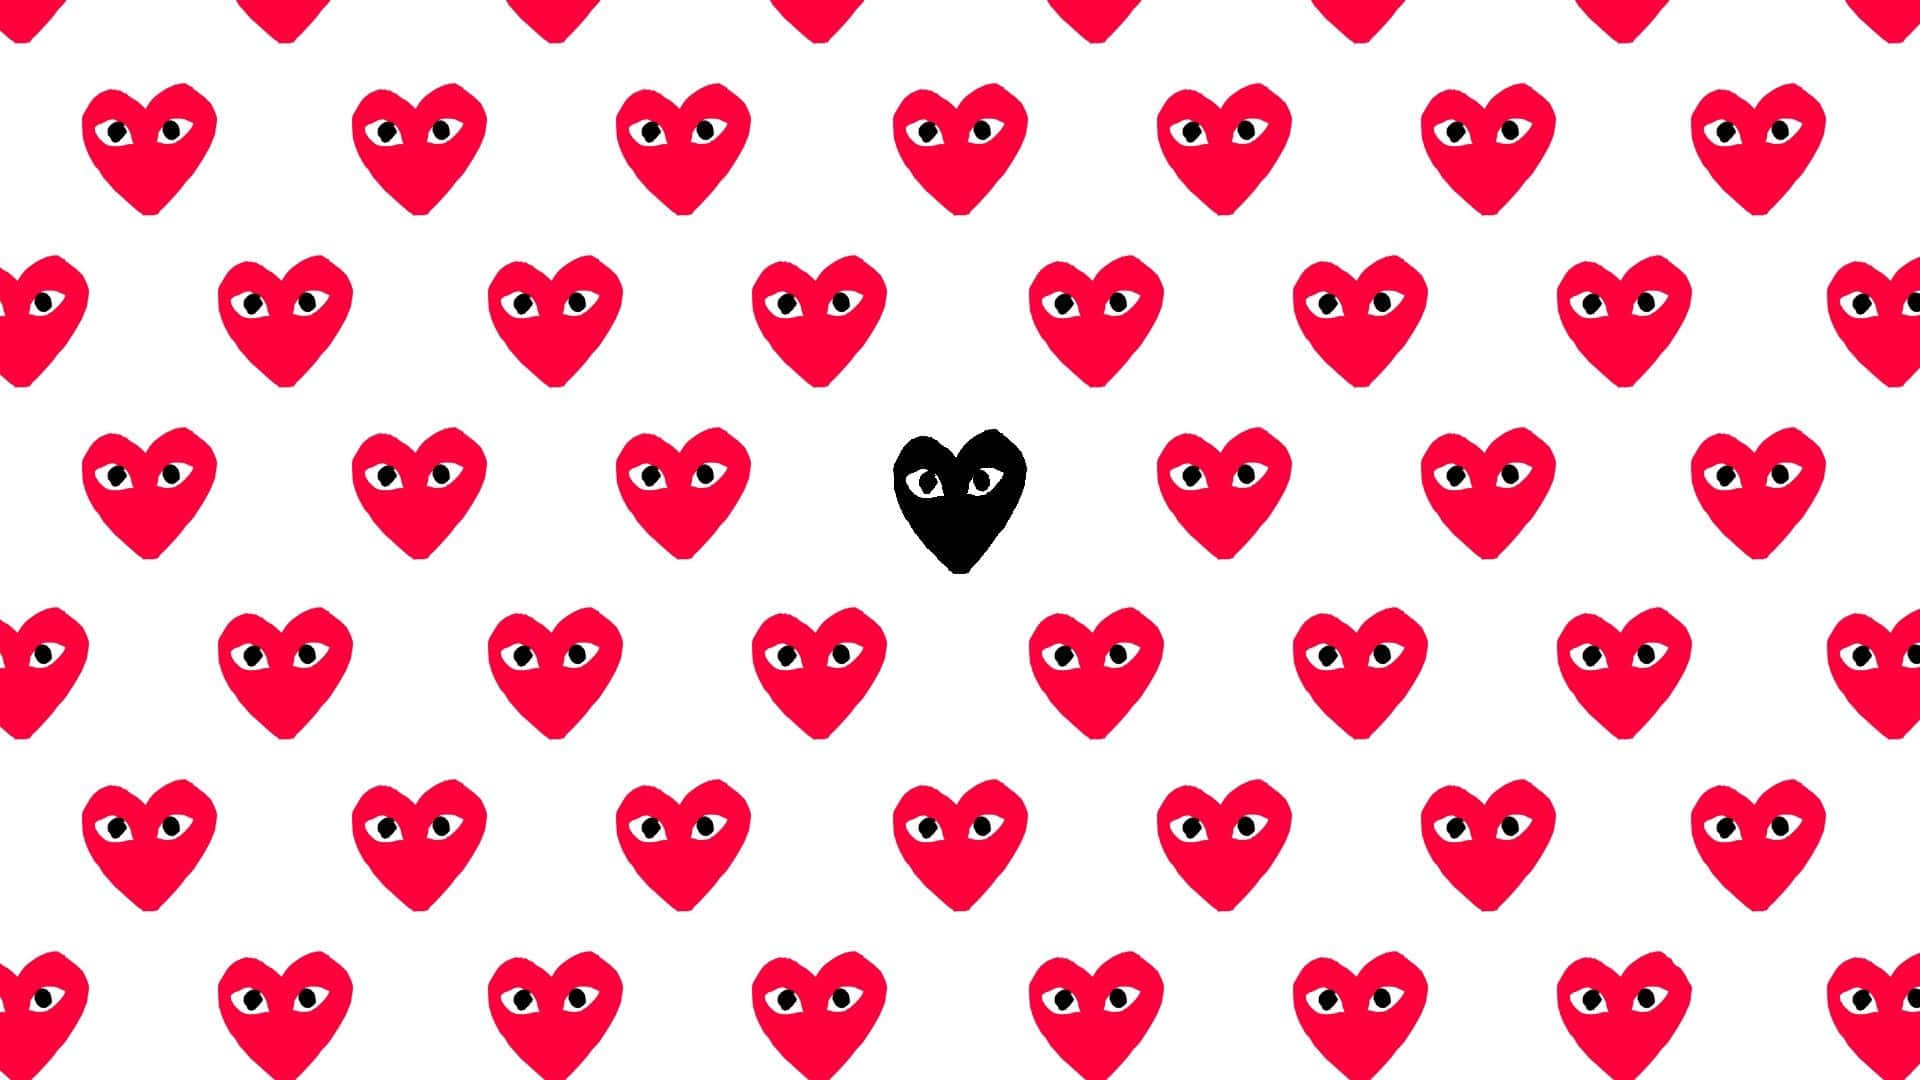 A Pattern Of Red Hearts With Black Eyes Wallpaper